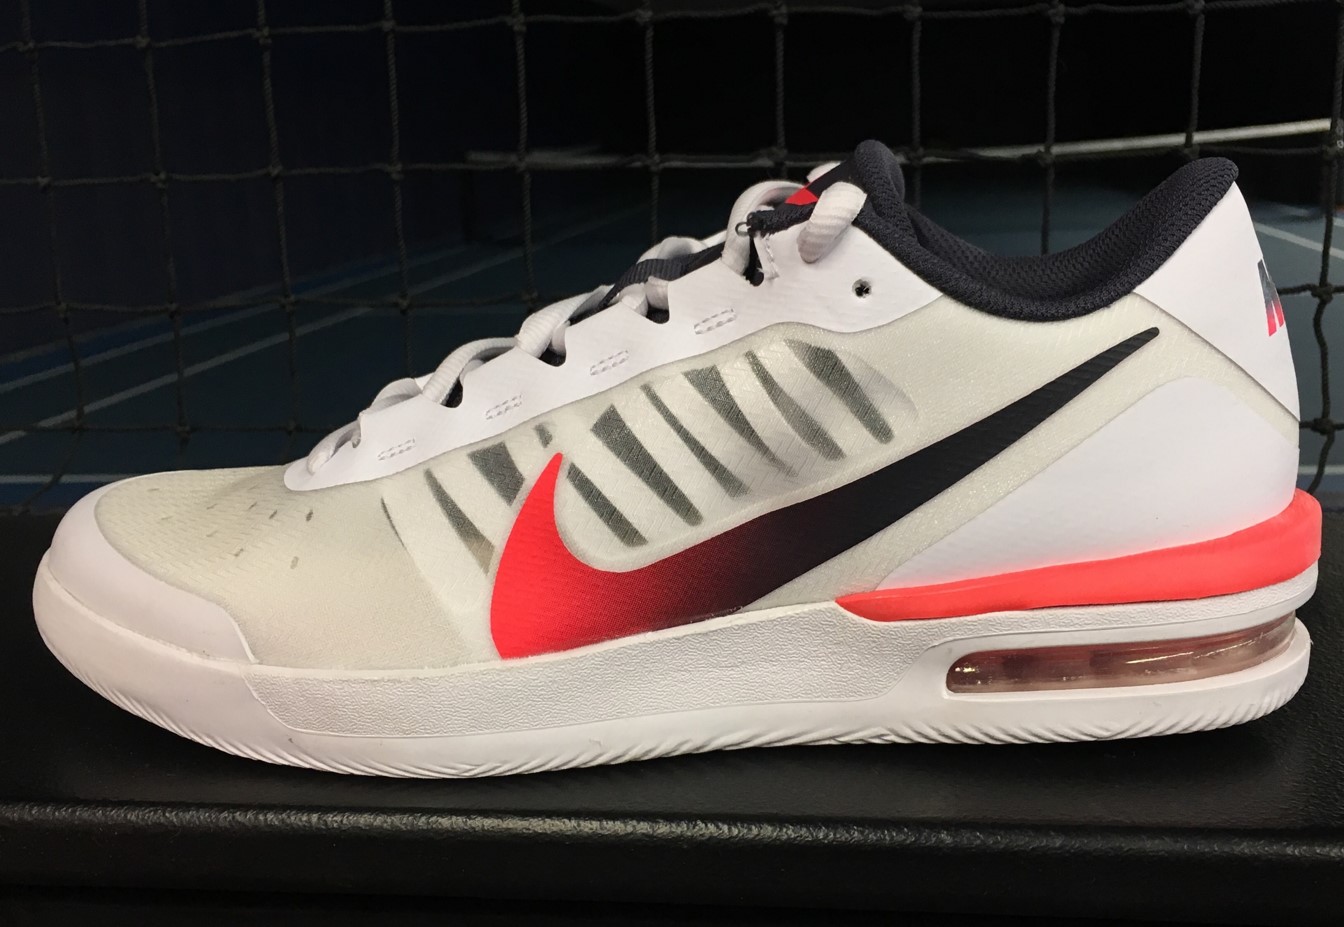 Catch Some Air with Nike's Air Max Vapor Wing MS - TENNIS EXPRESS BLOG